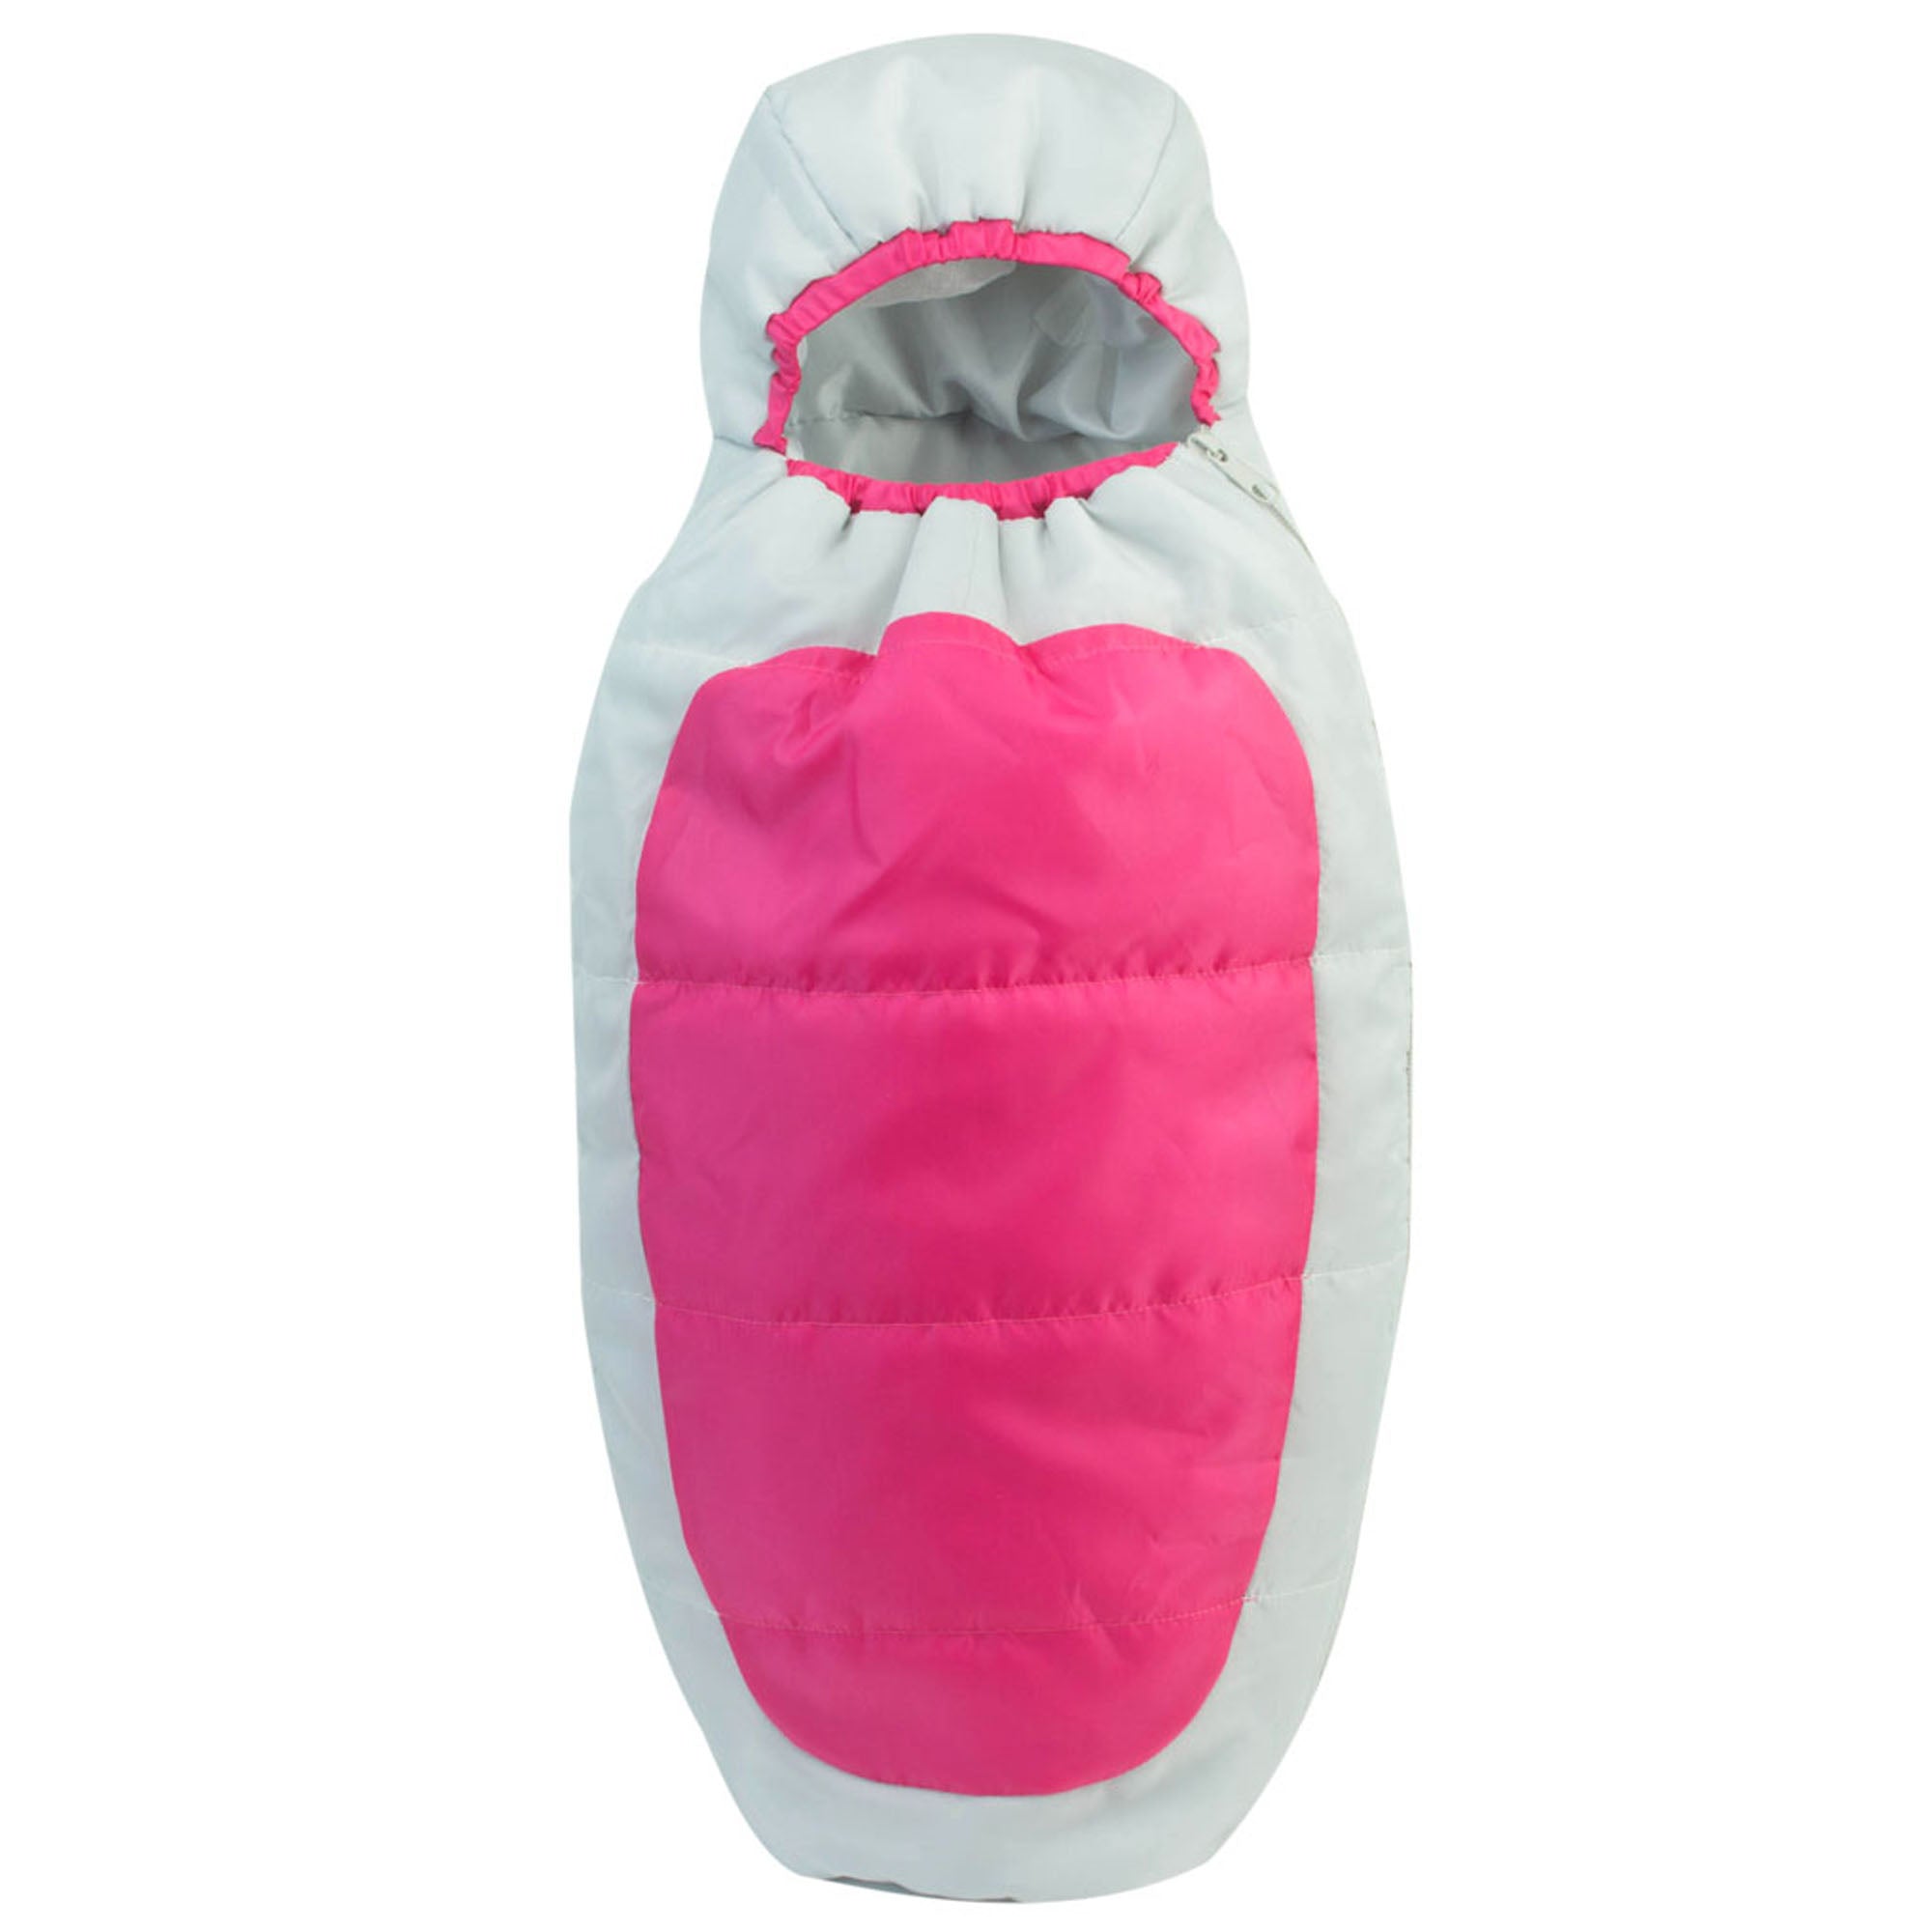 Sophia’s Super Cute Two-Toned Pretend Play Cocoon Style Outdoor Camping Essential Sleeping Bag for 18” Dolls, Hot Pink/Gray